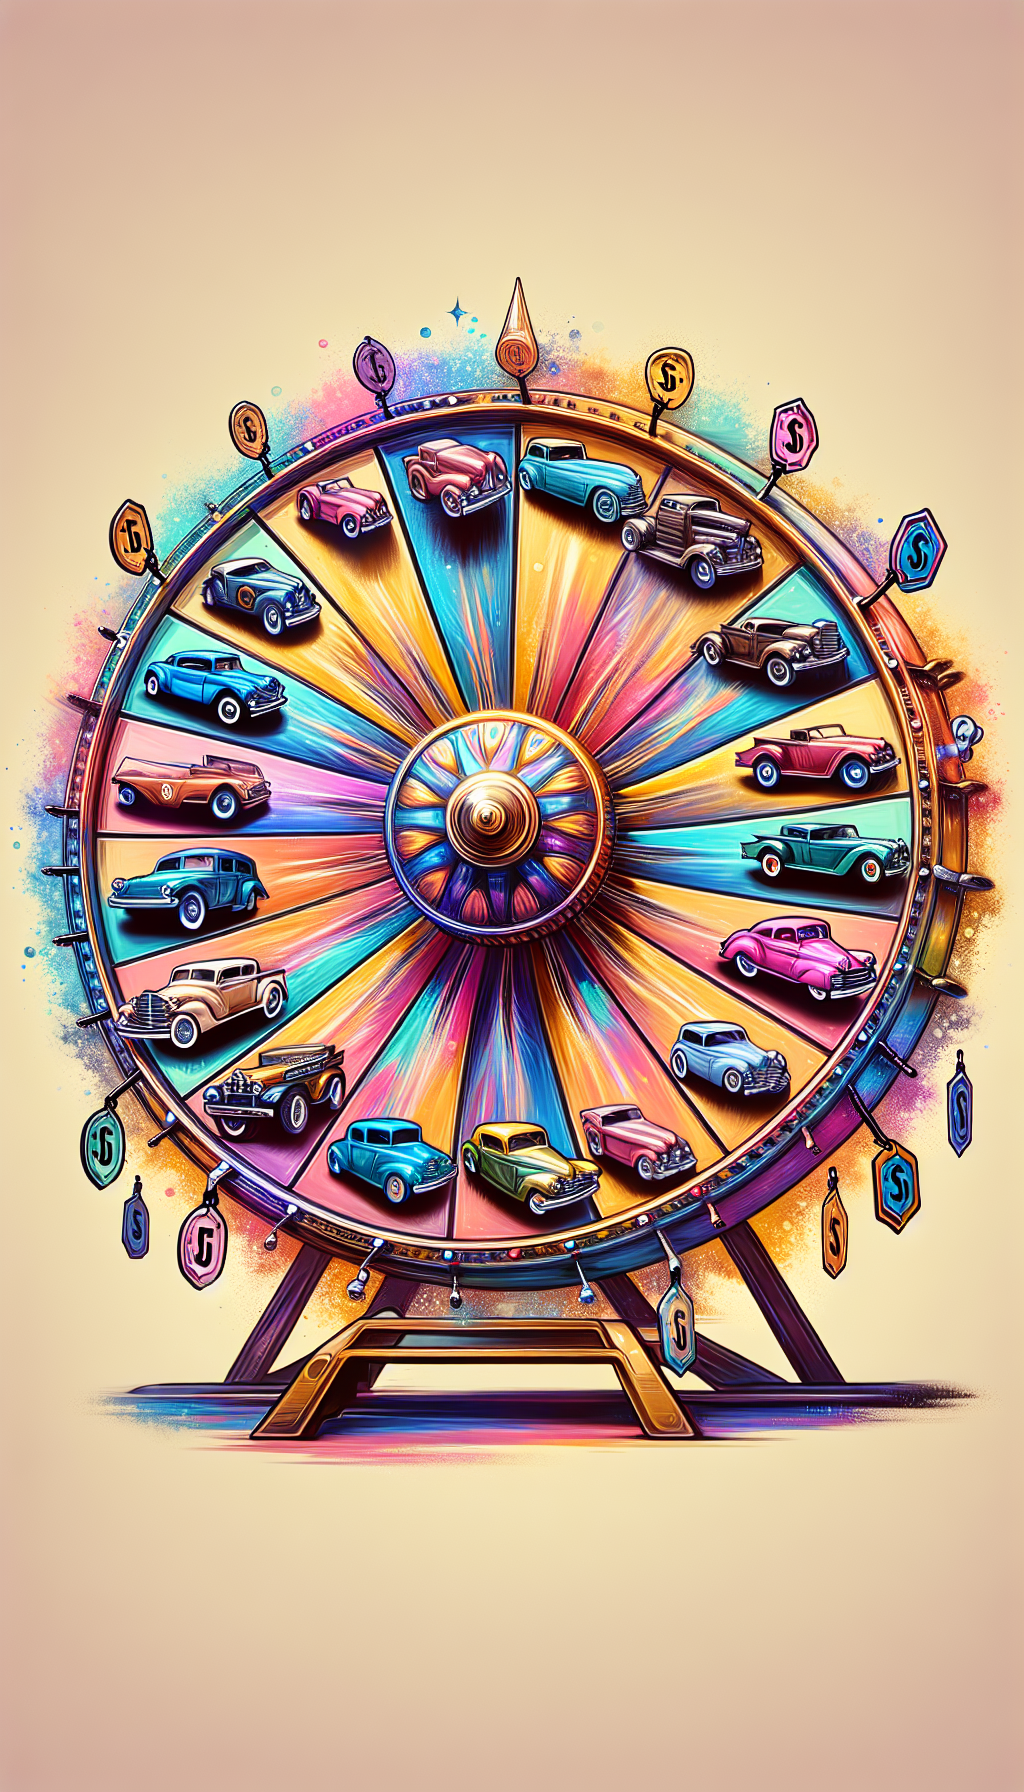 A vibrant and nostalgic illustration showcases a glimmering, oversized Matchbox car wheel, spinning like a fortune wheel, with rare vintage Matchbox models as the prizes on its spokes. Each segment is stylized with a distinct, whimsical look ranging from watercolor pastels to gritty comic art, with price tags dangled from mirrors to hint at their increasing collectible value.